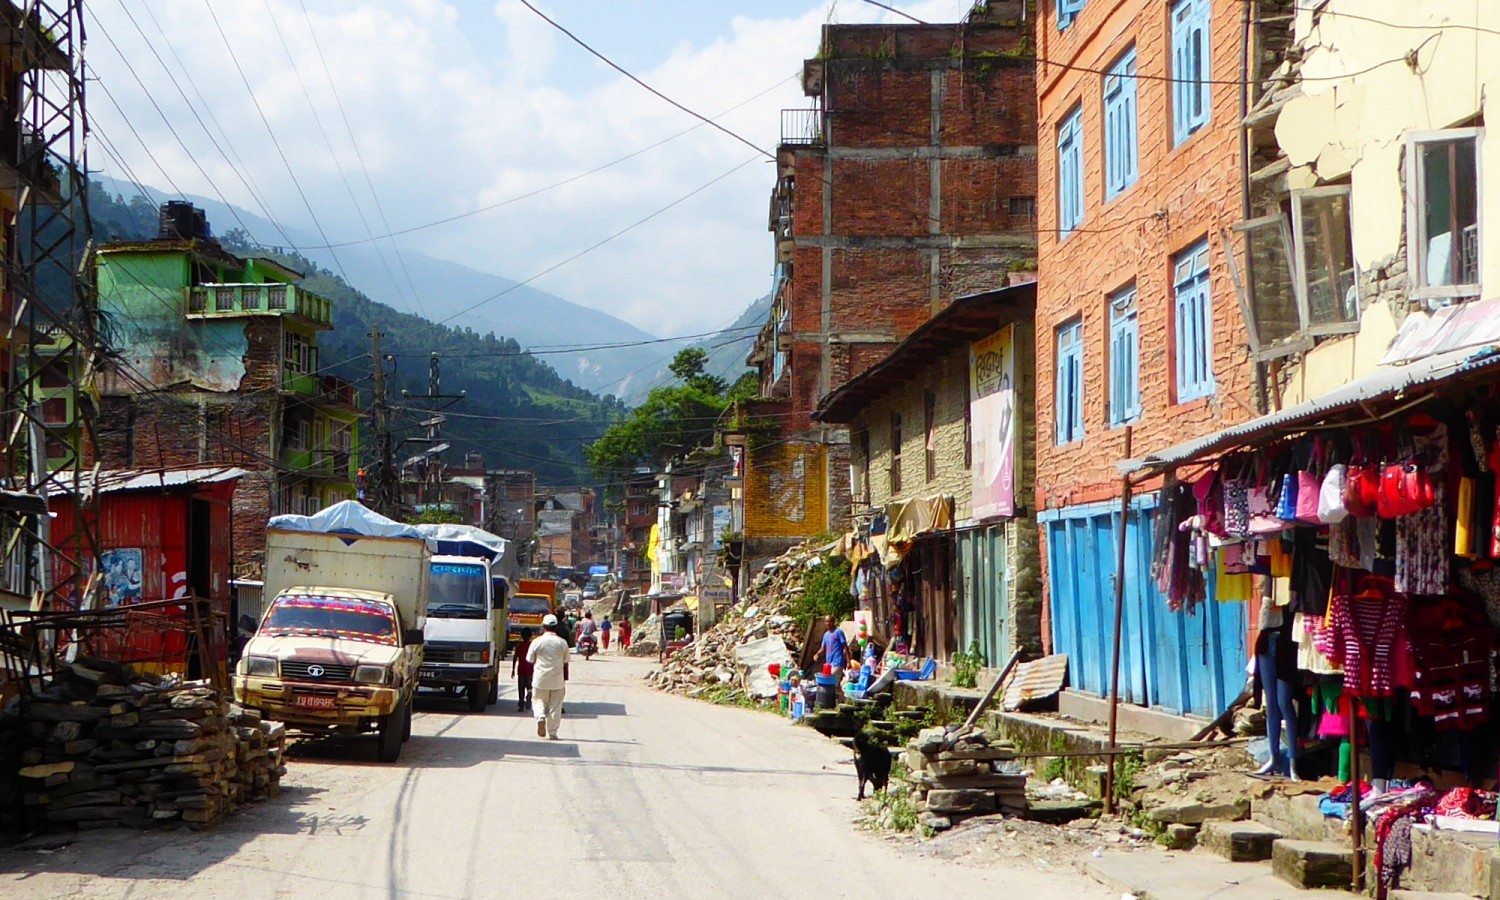 The main road in Bahrabise, Sindhupalchowk, four months after the earthquake. Piles of rubble and building materials line the road.